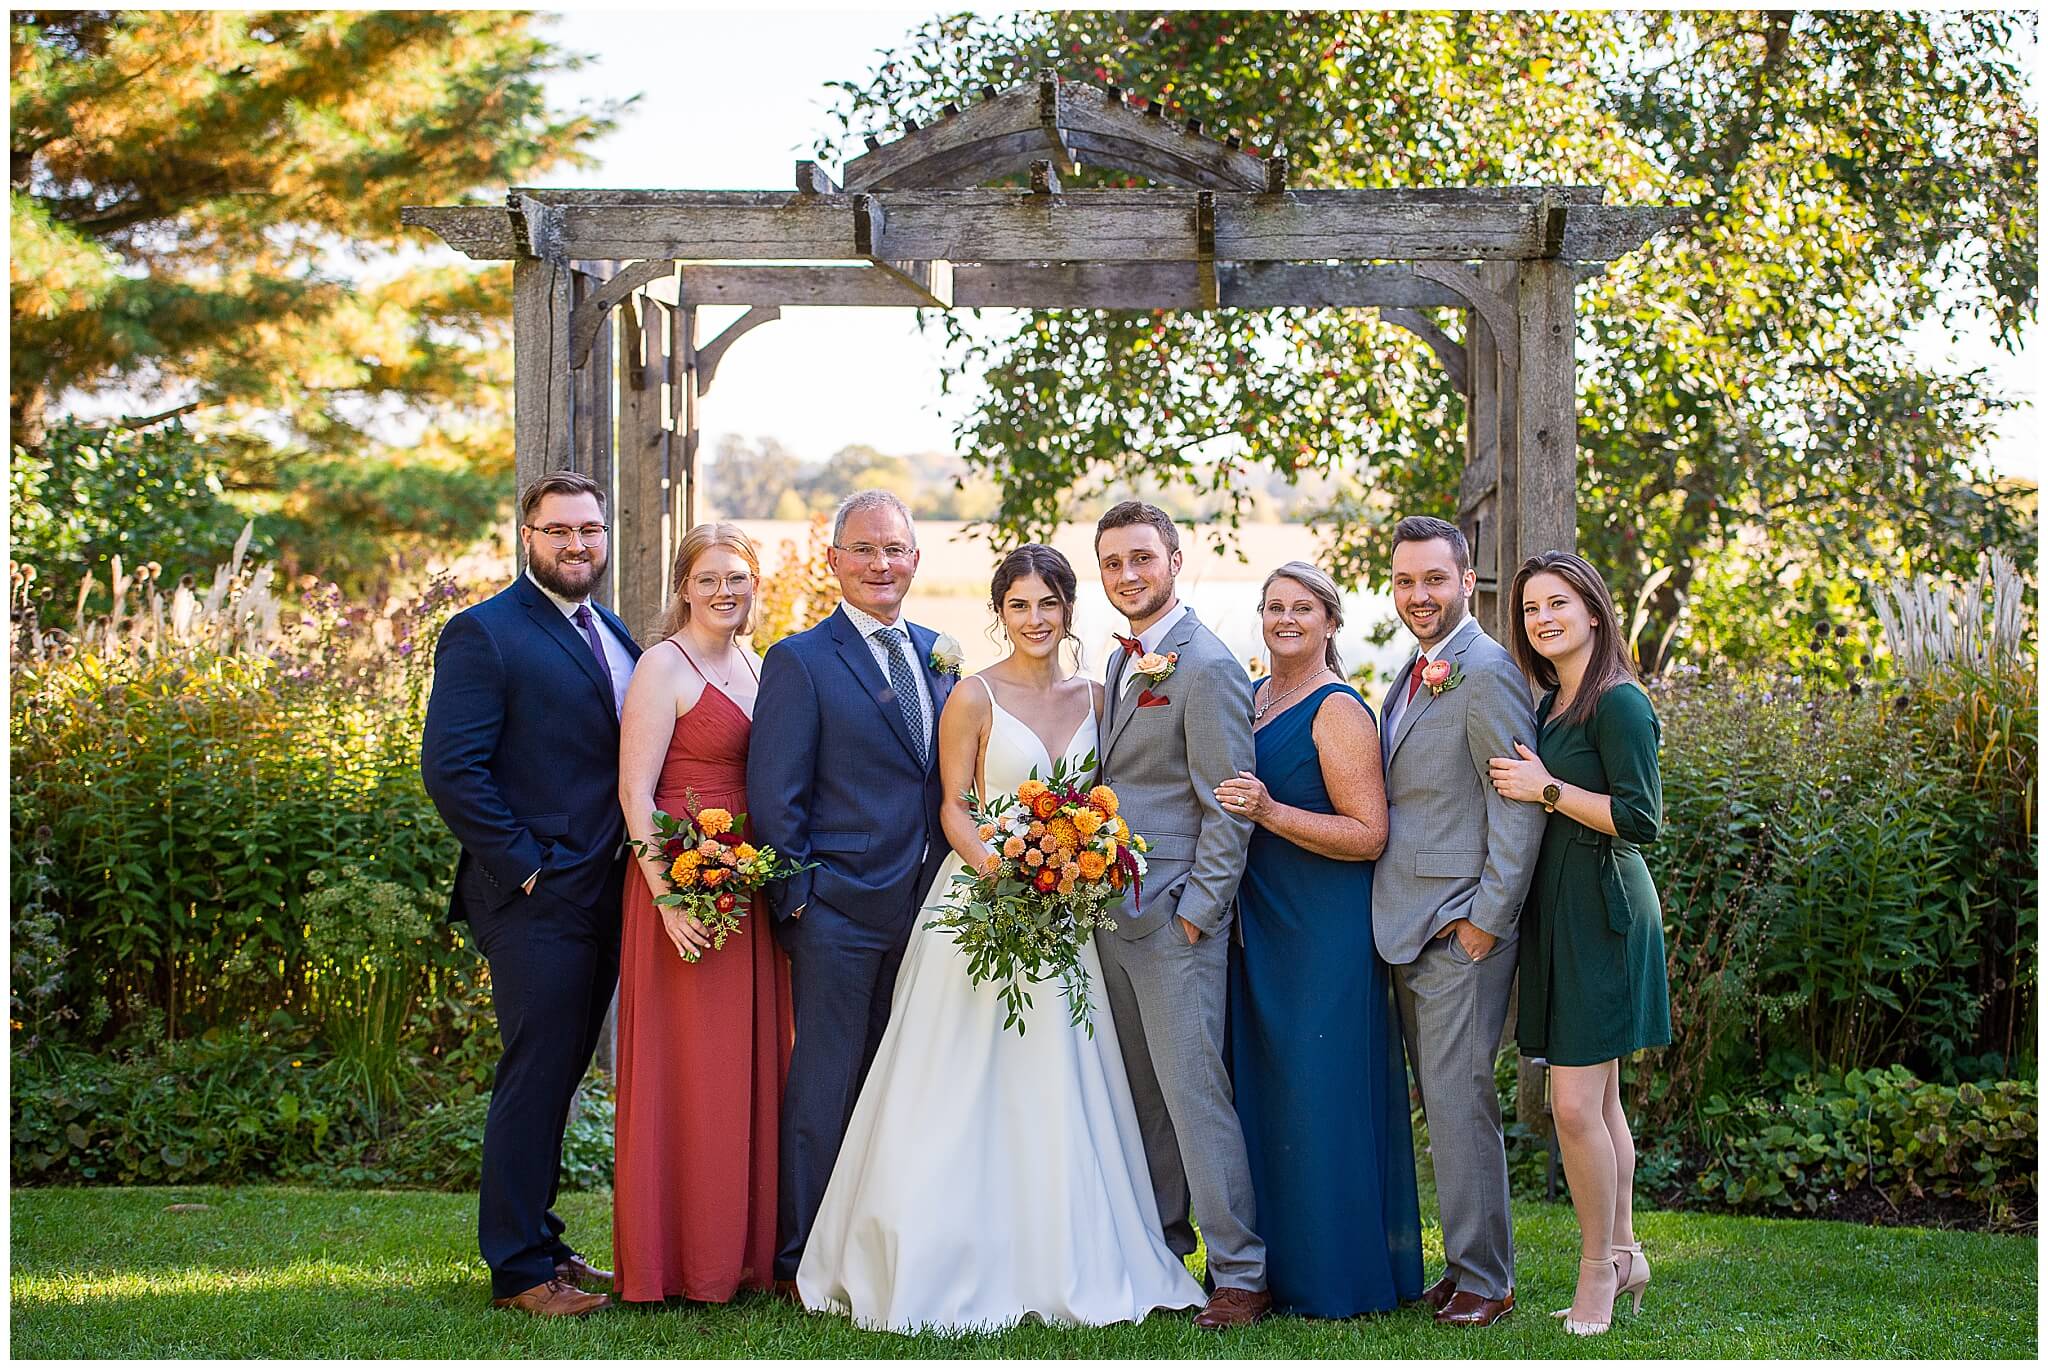 formal family photo of a bride and groom and their family members. Taken outdoors in the gardens of Strathmere Weddings